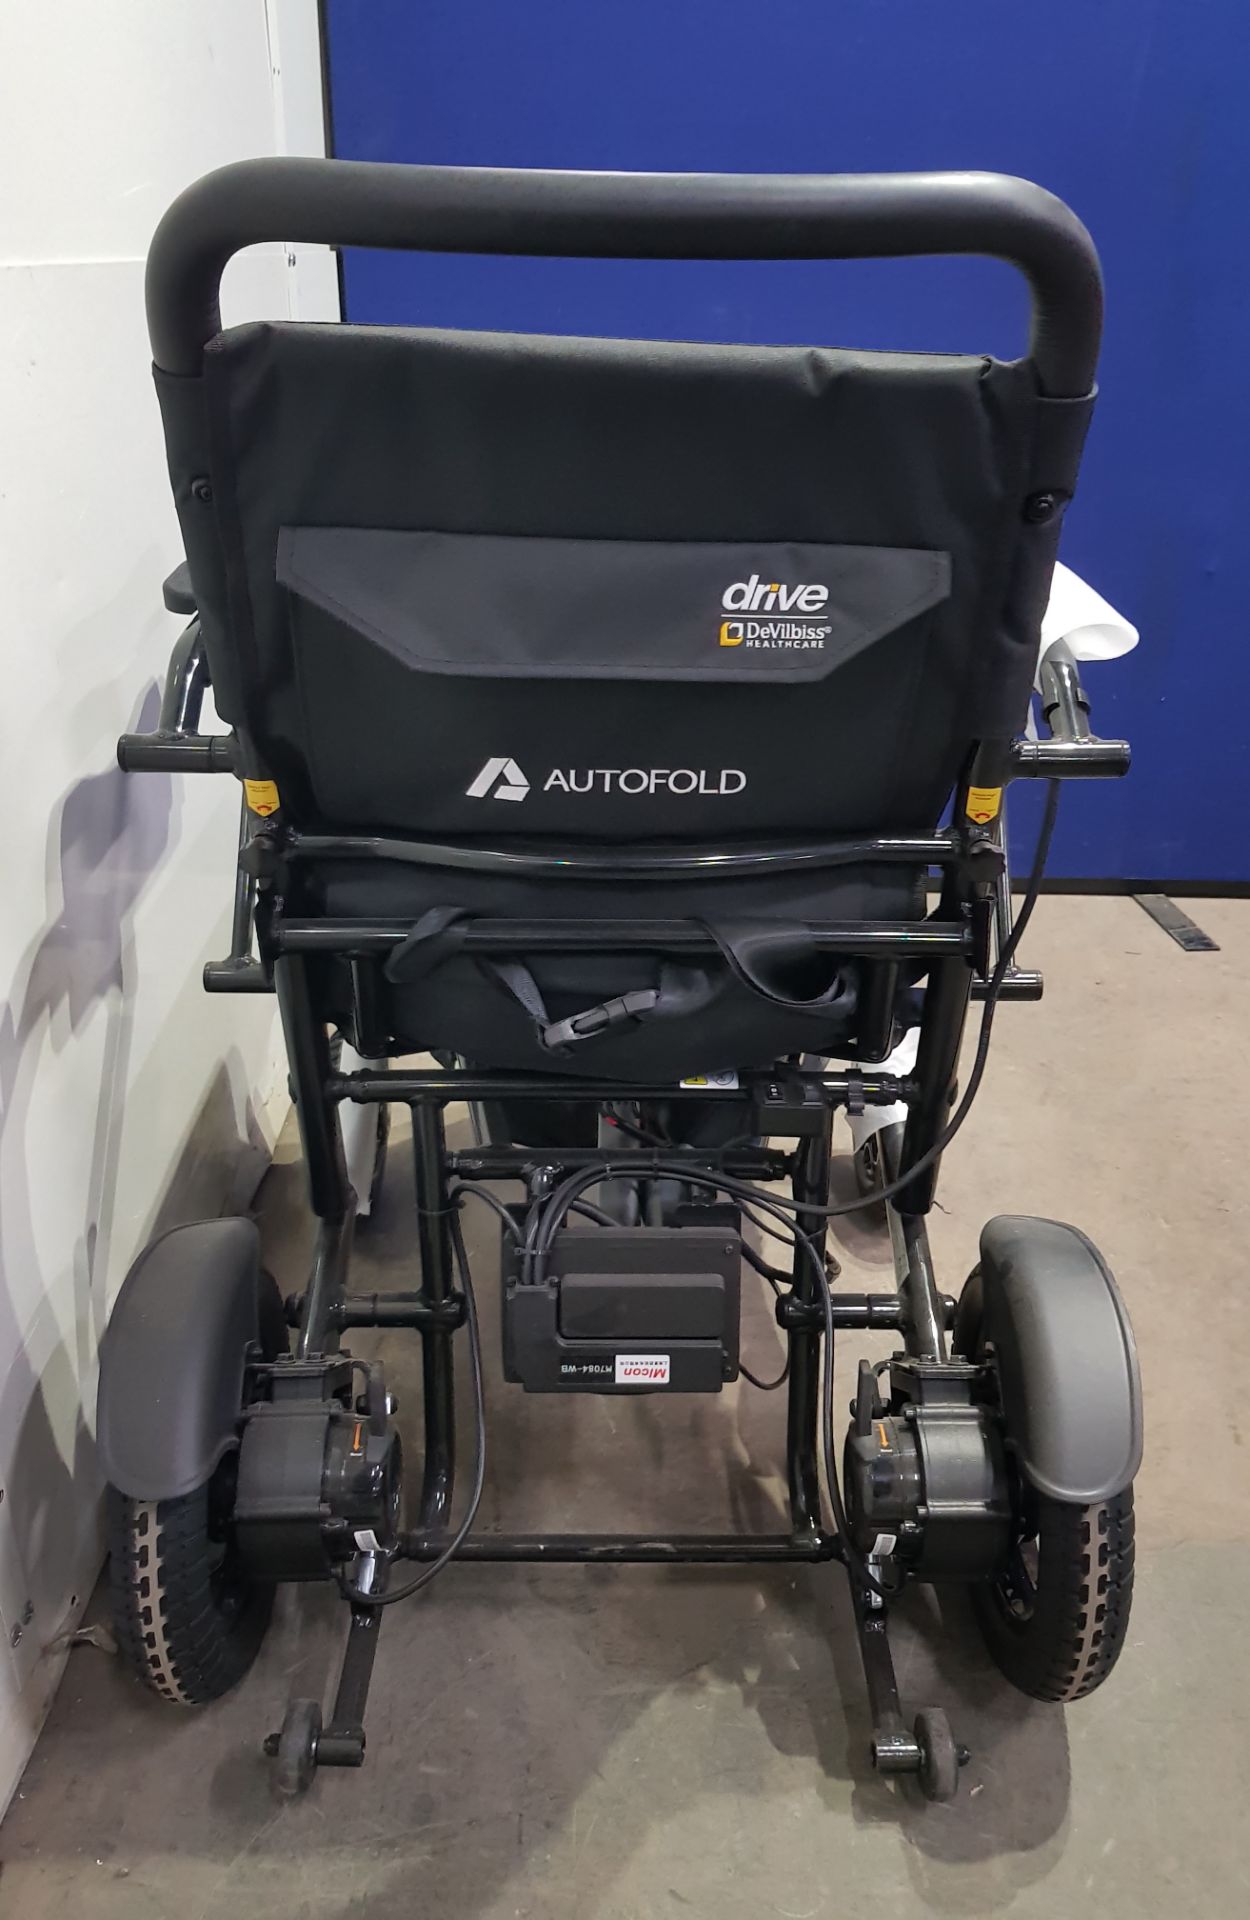 Drive Devilbiss Autofolding Electric Wheelchair 2022 - Image 2 of 6